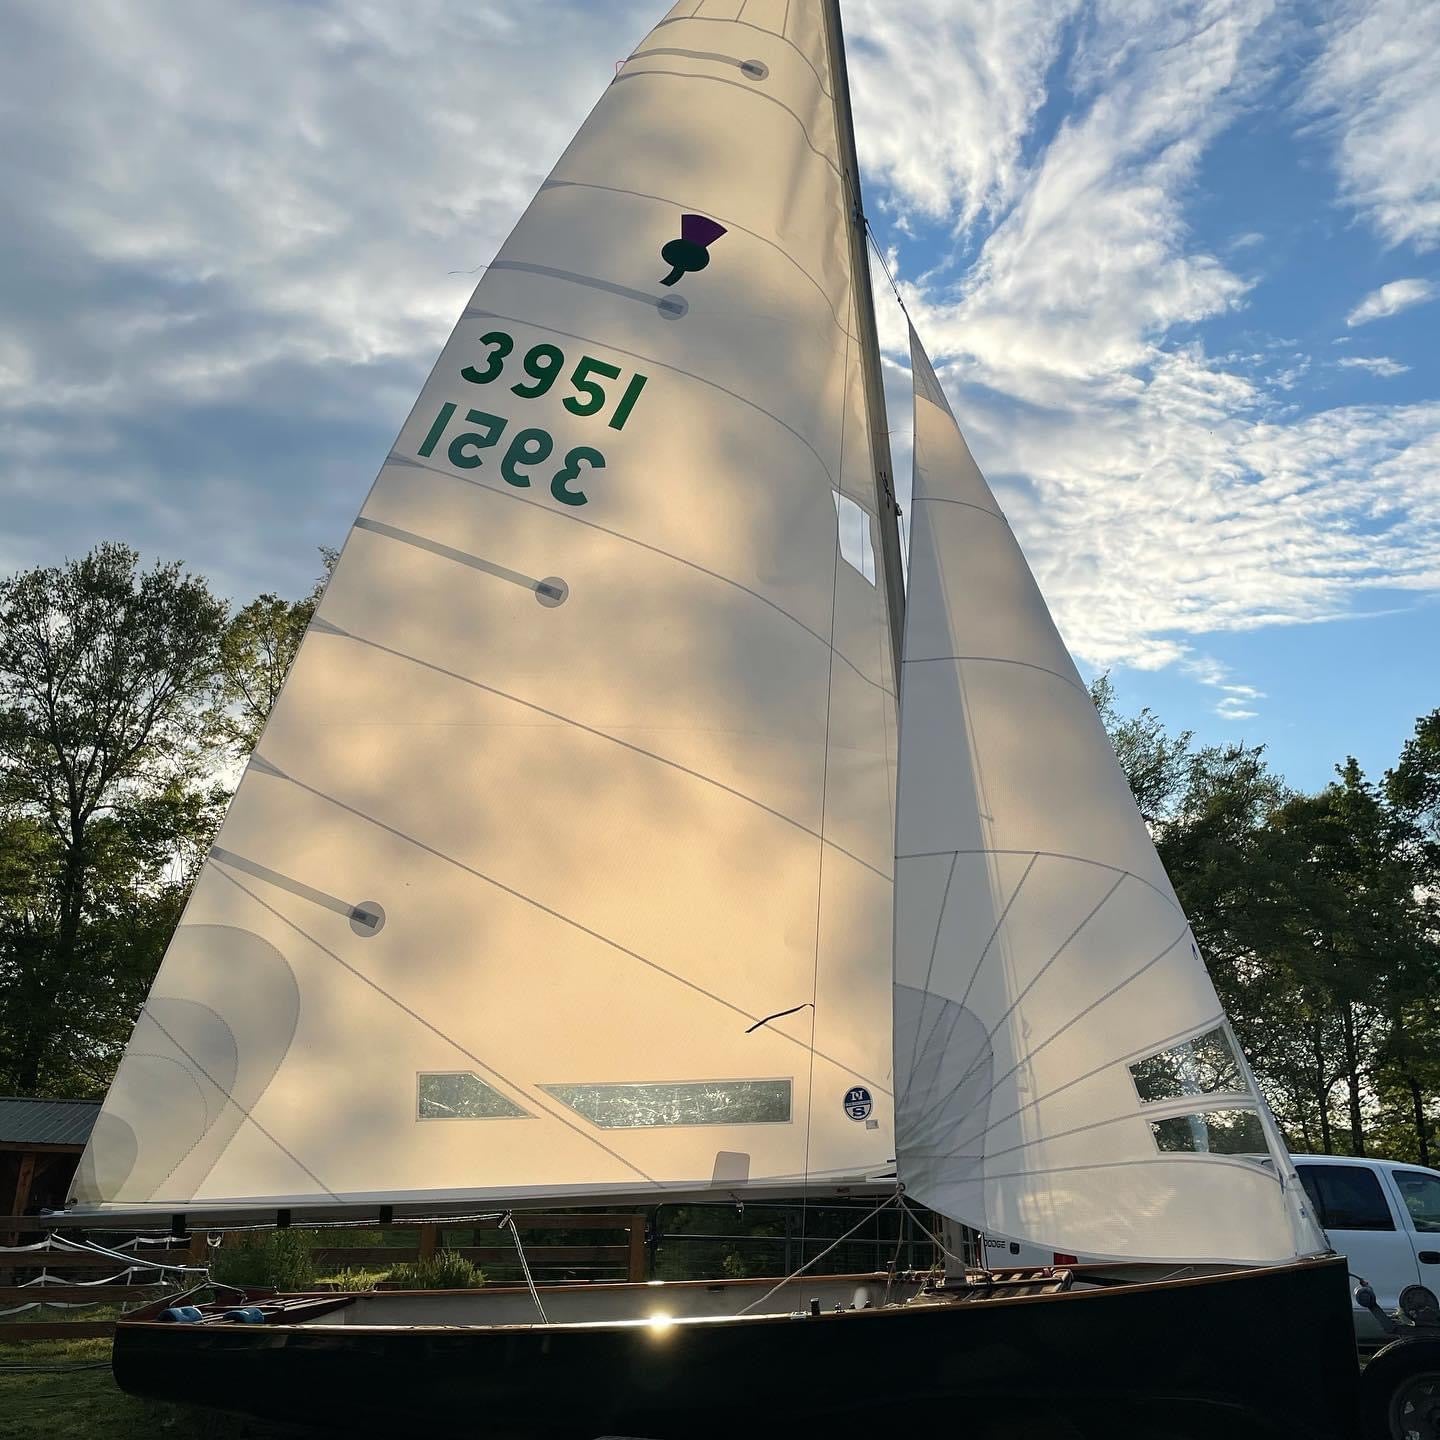 North Thistle Designs Fast Out of the Box at Bottoms-Up Regatta